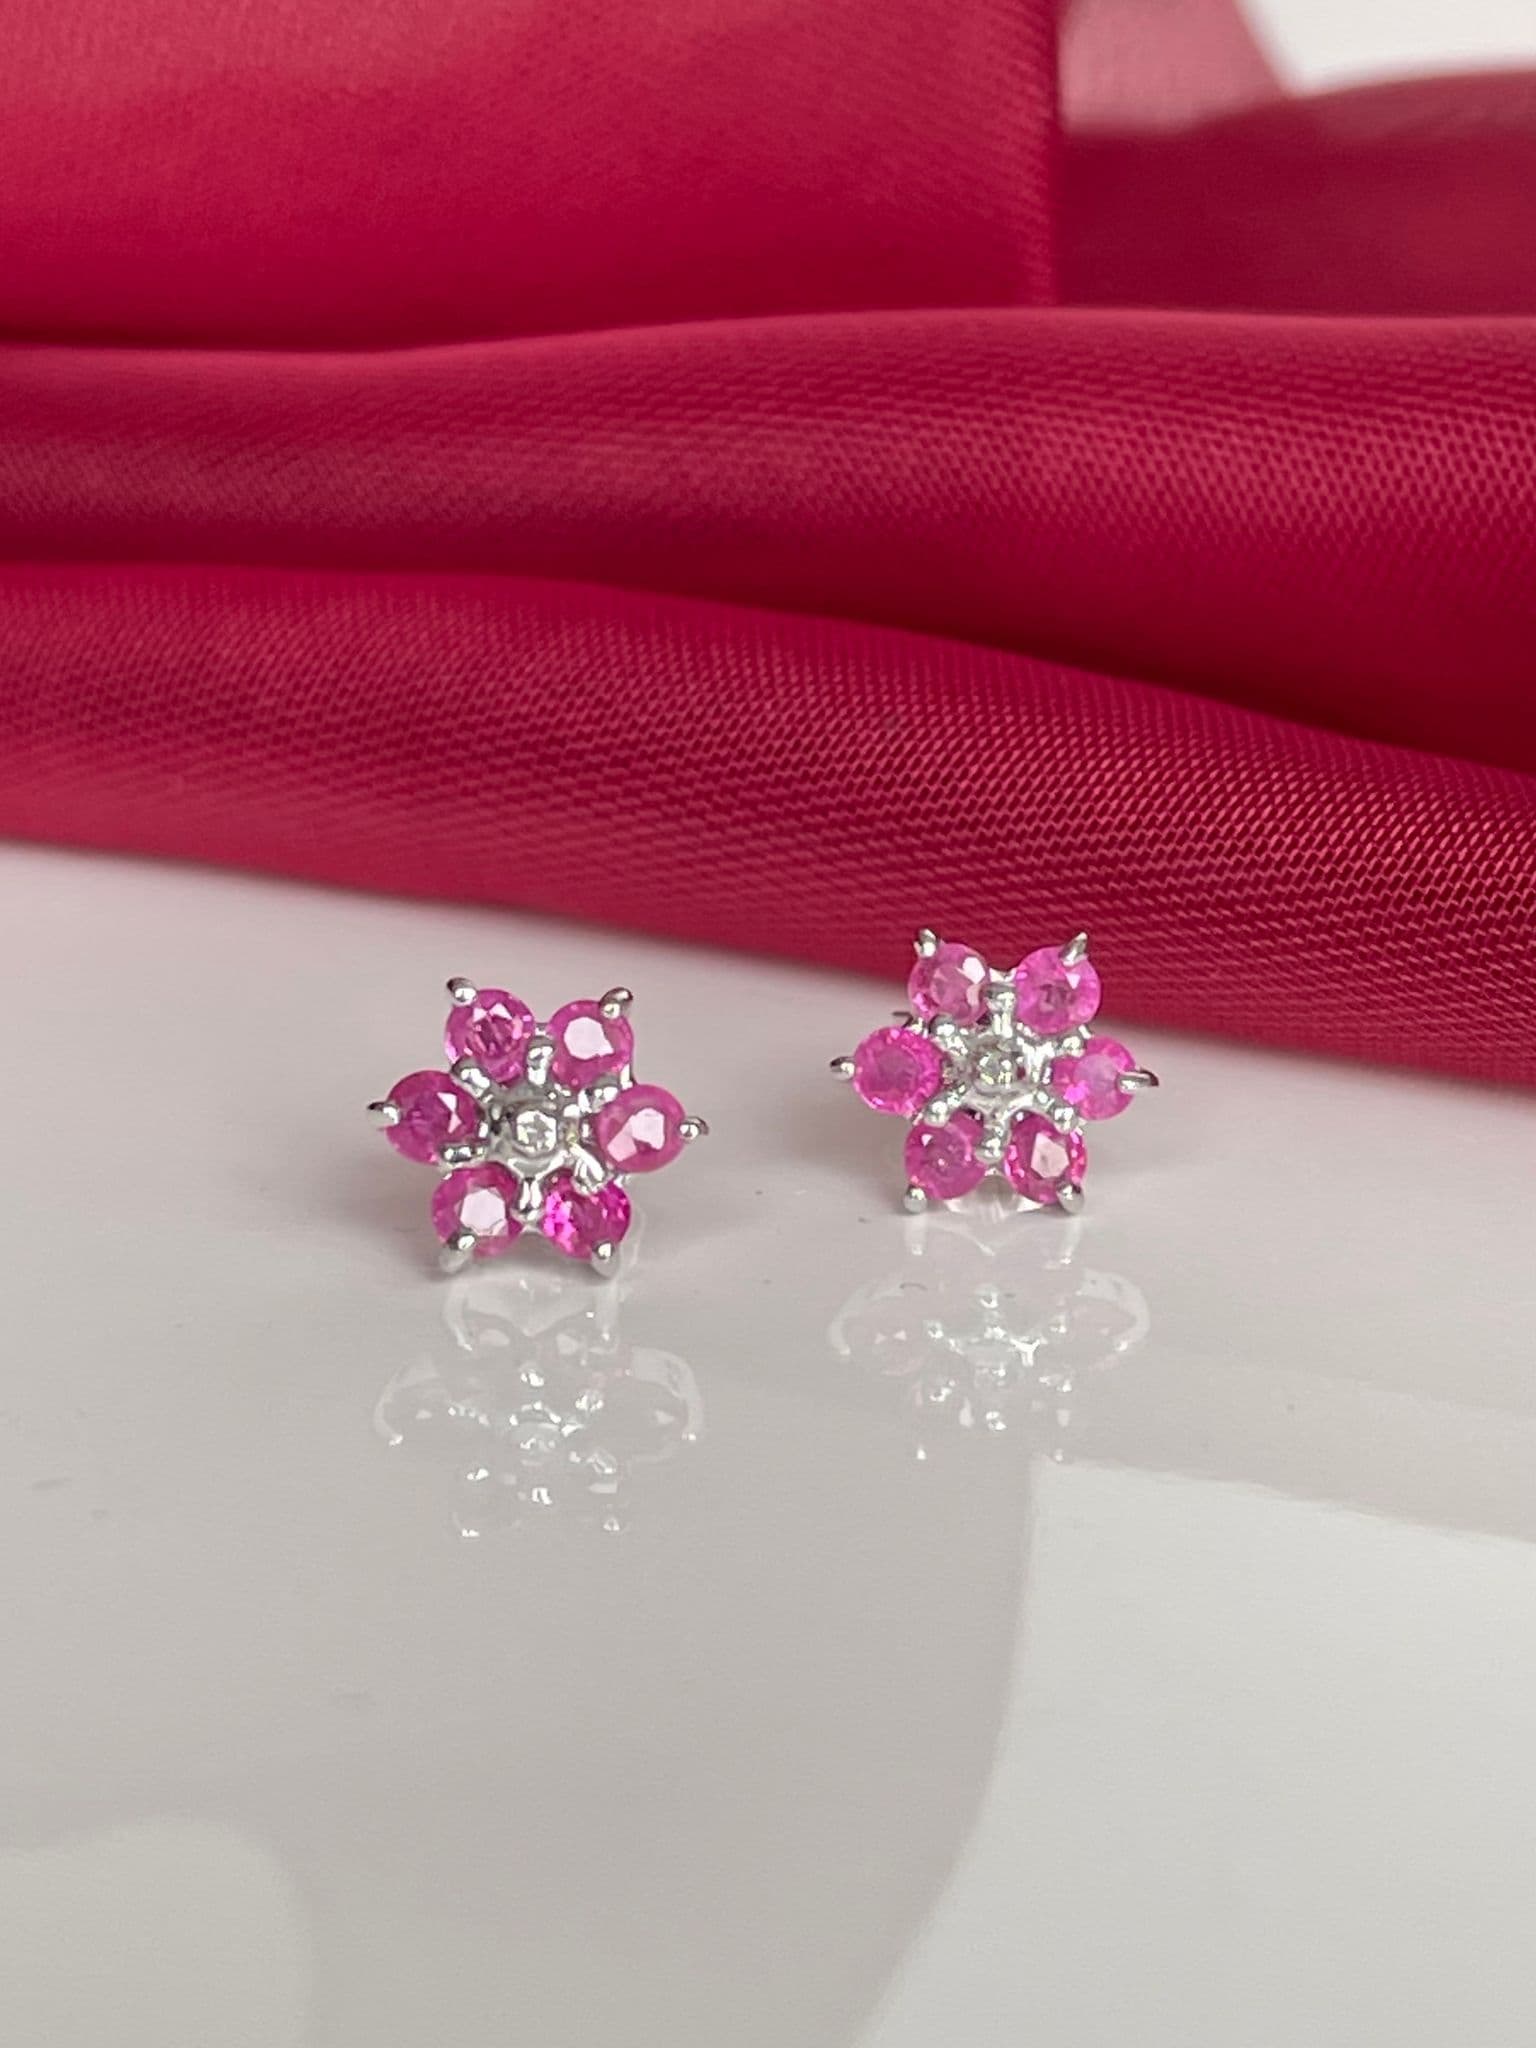 Round Ruby And Diamond Sterling Silver Red Cluster Earrings